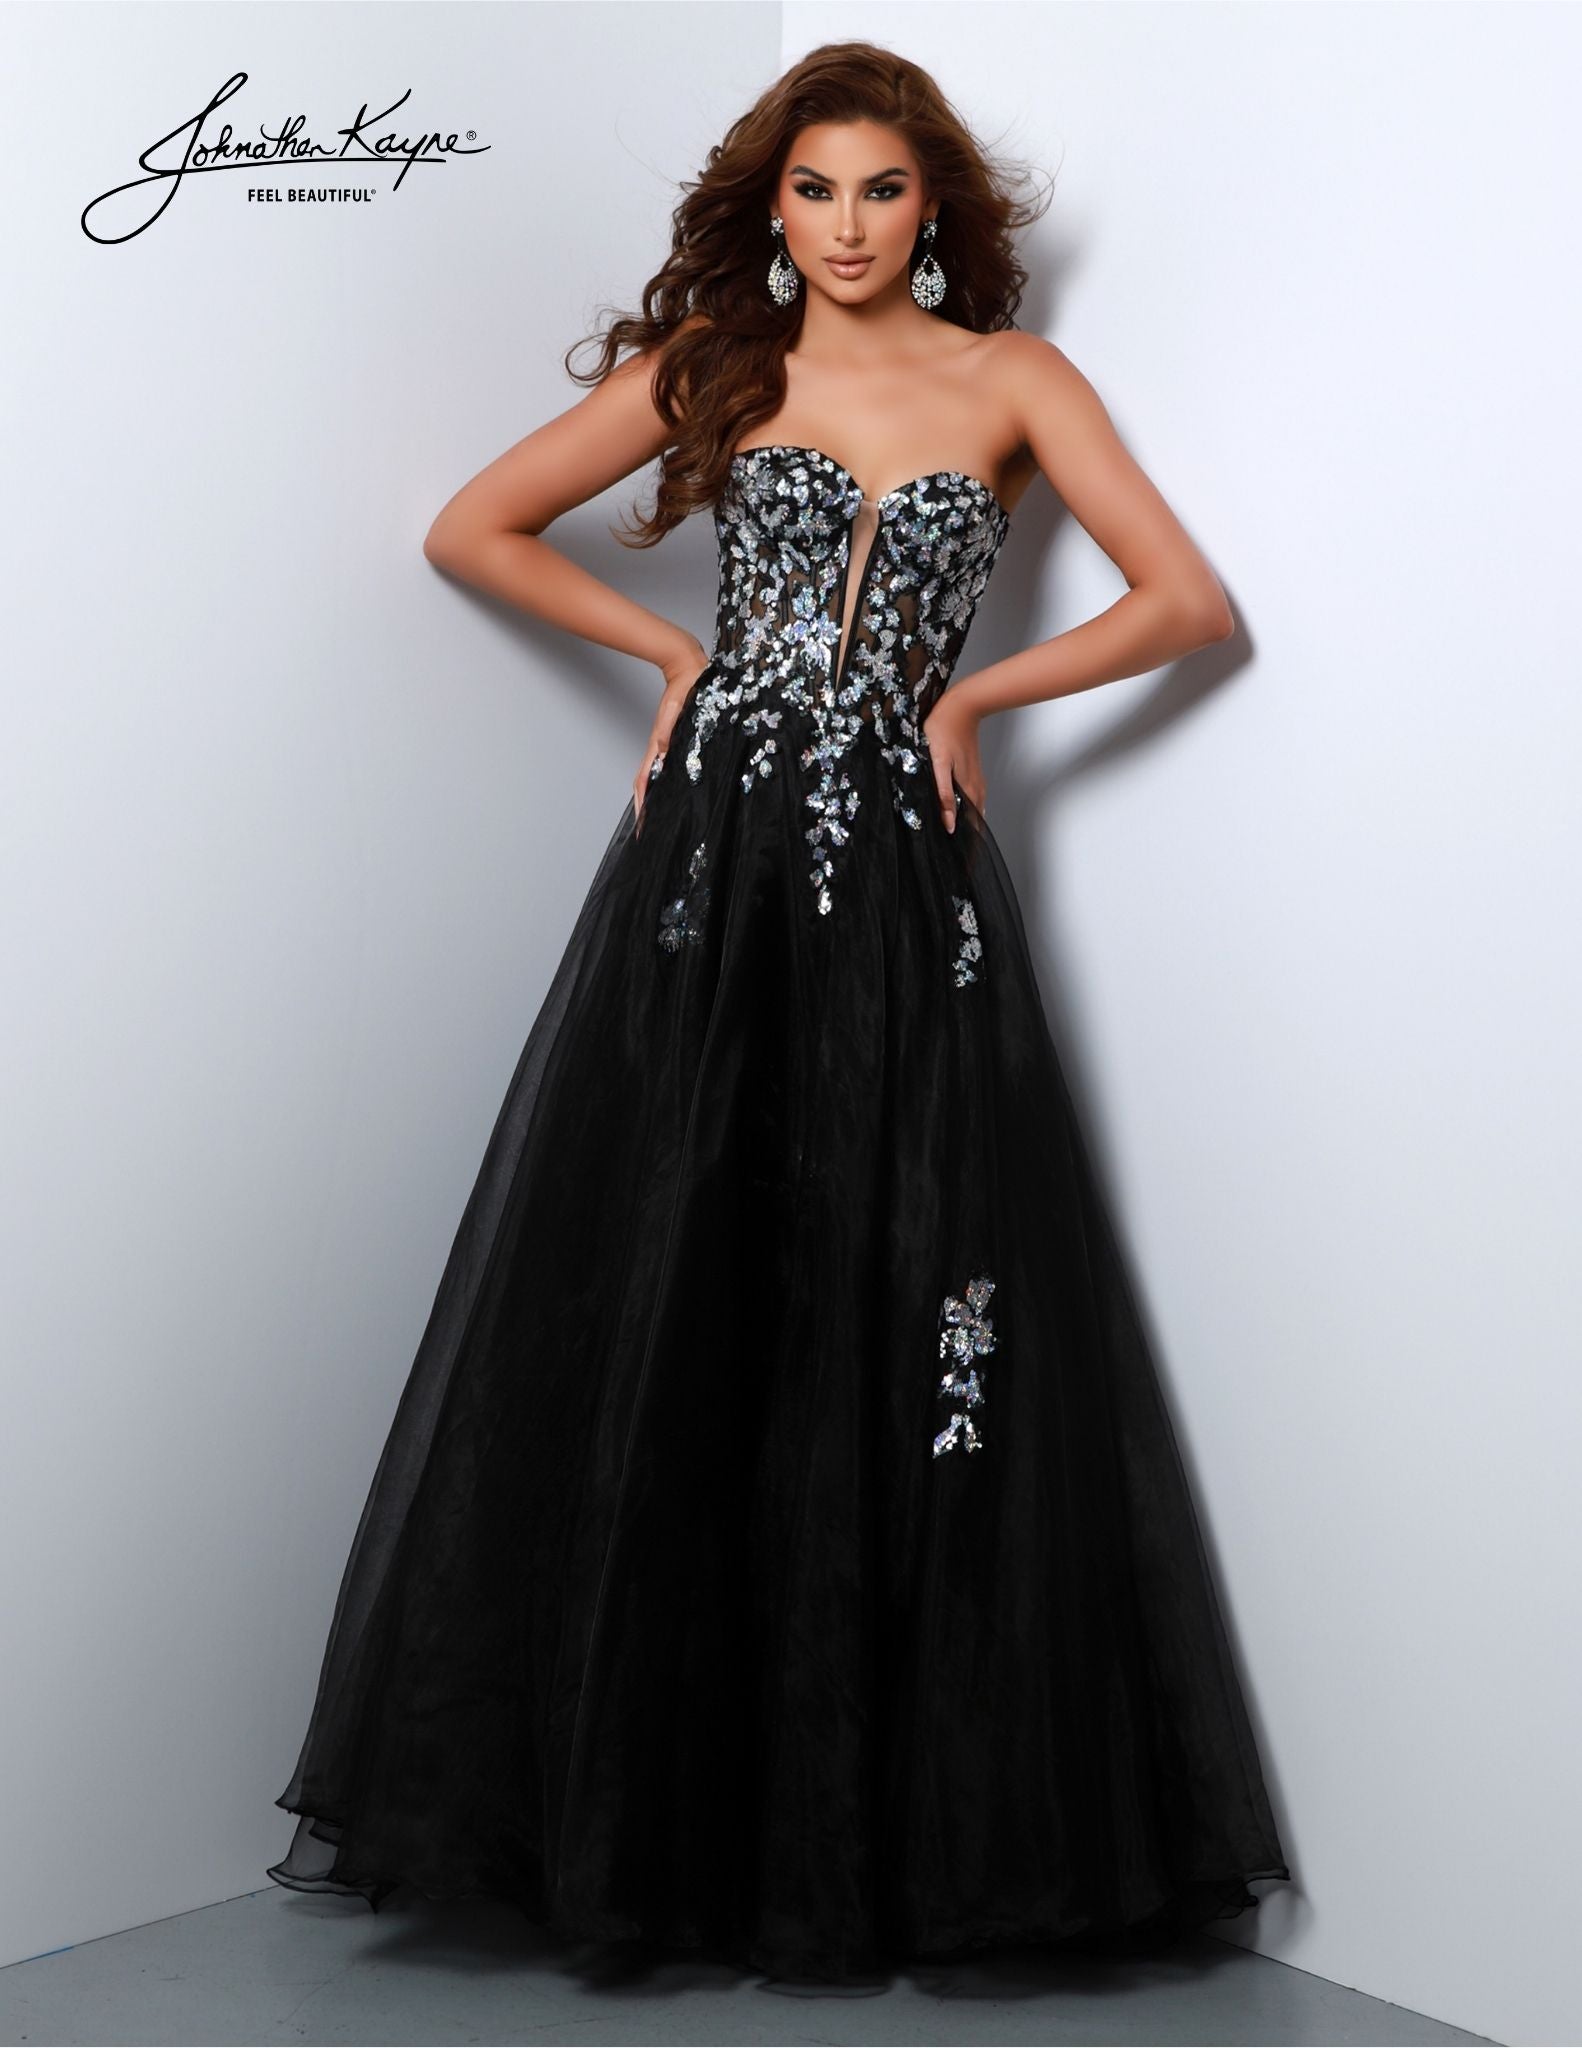 Make a statement in the Johnathan Kayne 2809 Long Prom Dress. This beautiful full-length gown features a sheer sequin corset bodice with a formal A-line skirt in a flattering silhouette. Turn heads at your prom or pageant in this stunning gown. Elegance meets untamed beauty in this ballgown. The captivating sequin detailing adds a dash of fierce to your already enchanting presence. 